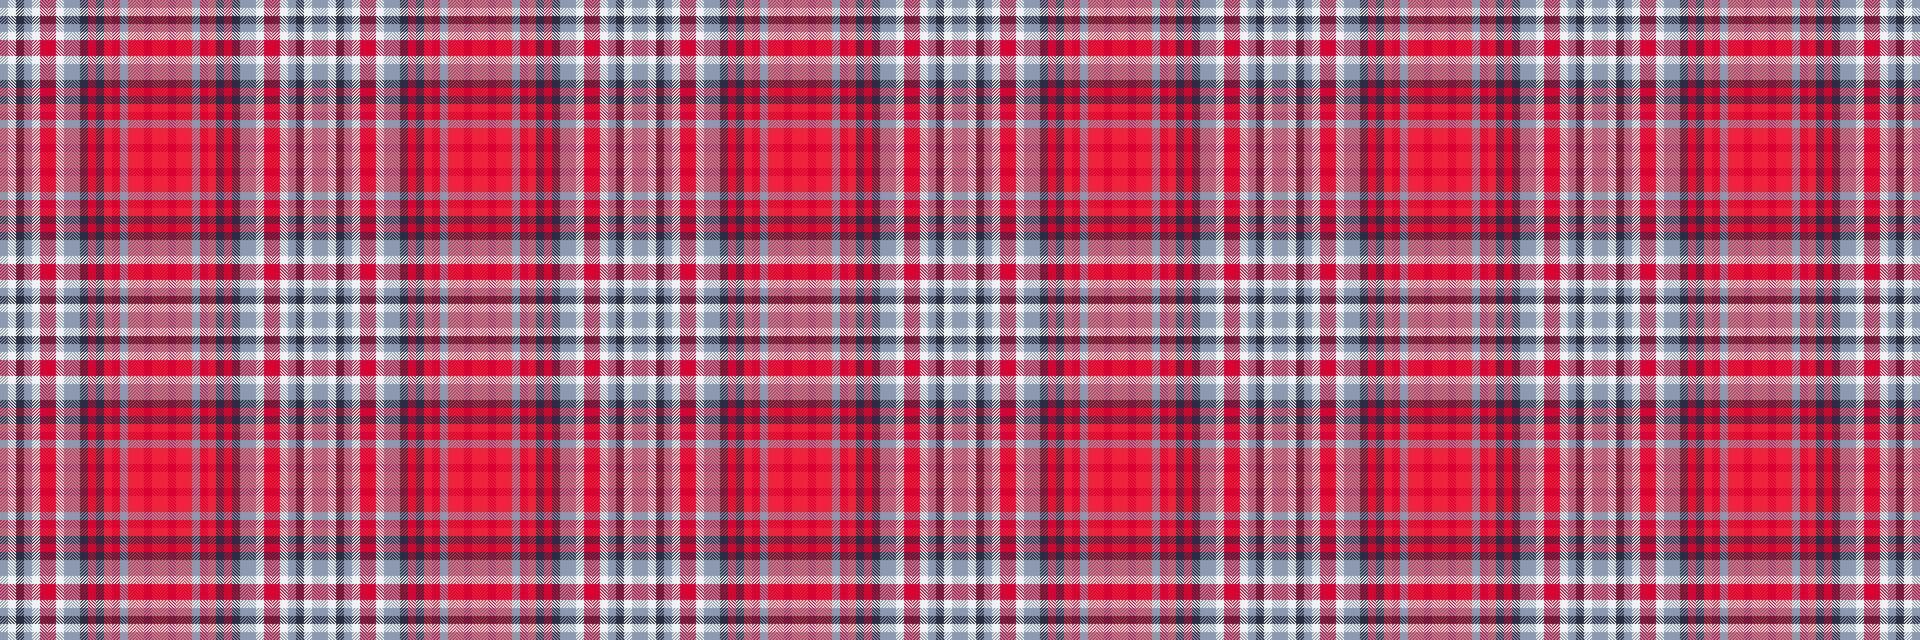 Bed fabric background tartan, 70s plaid seamless textile. Halloween pattern vector check texture in red and pastel colors.